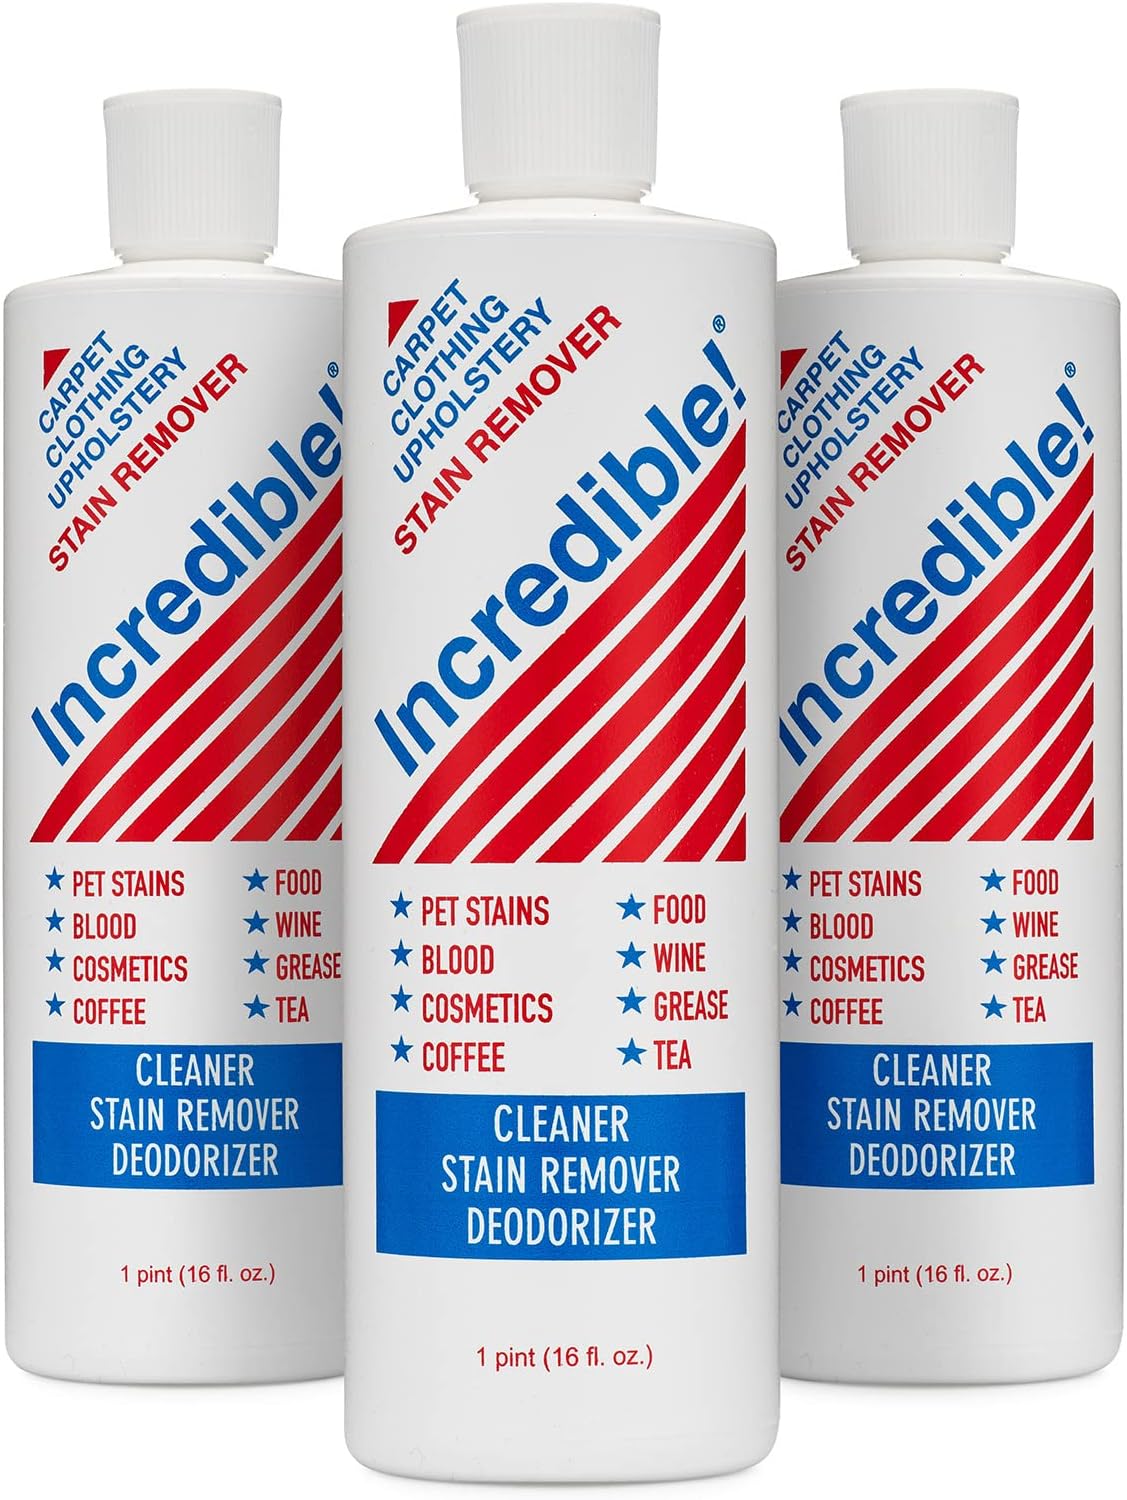 Stain Remover For Clothes, Laundry, Carpets, Mattress & Upholstery, 16.oz (Pack of 3)